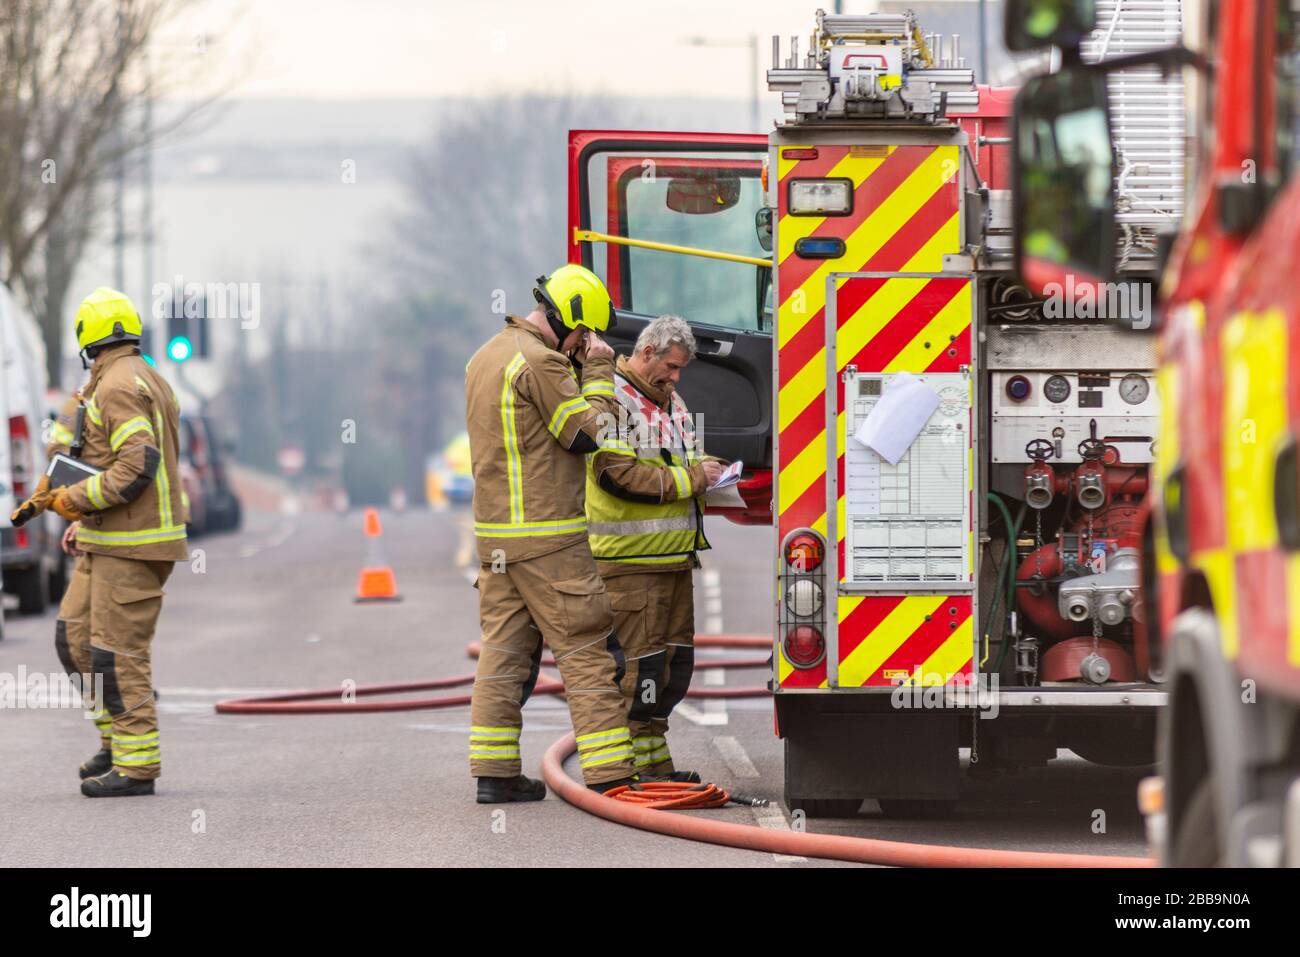 Fire Service dealing with a fire next to Sainsbury's supermarket in Westcliff on Sea, Essex, UK during COVID-19 lockdown. Officer taking notes Stock Photo